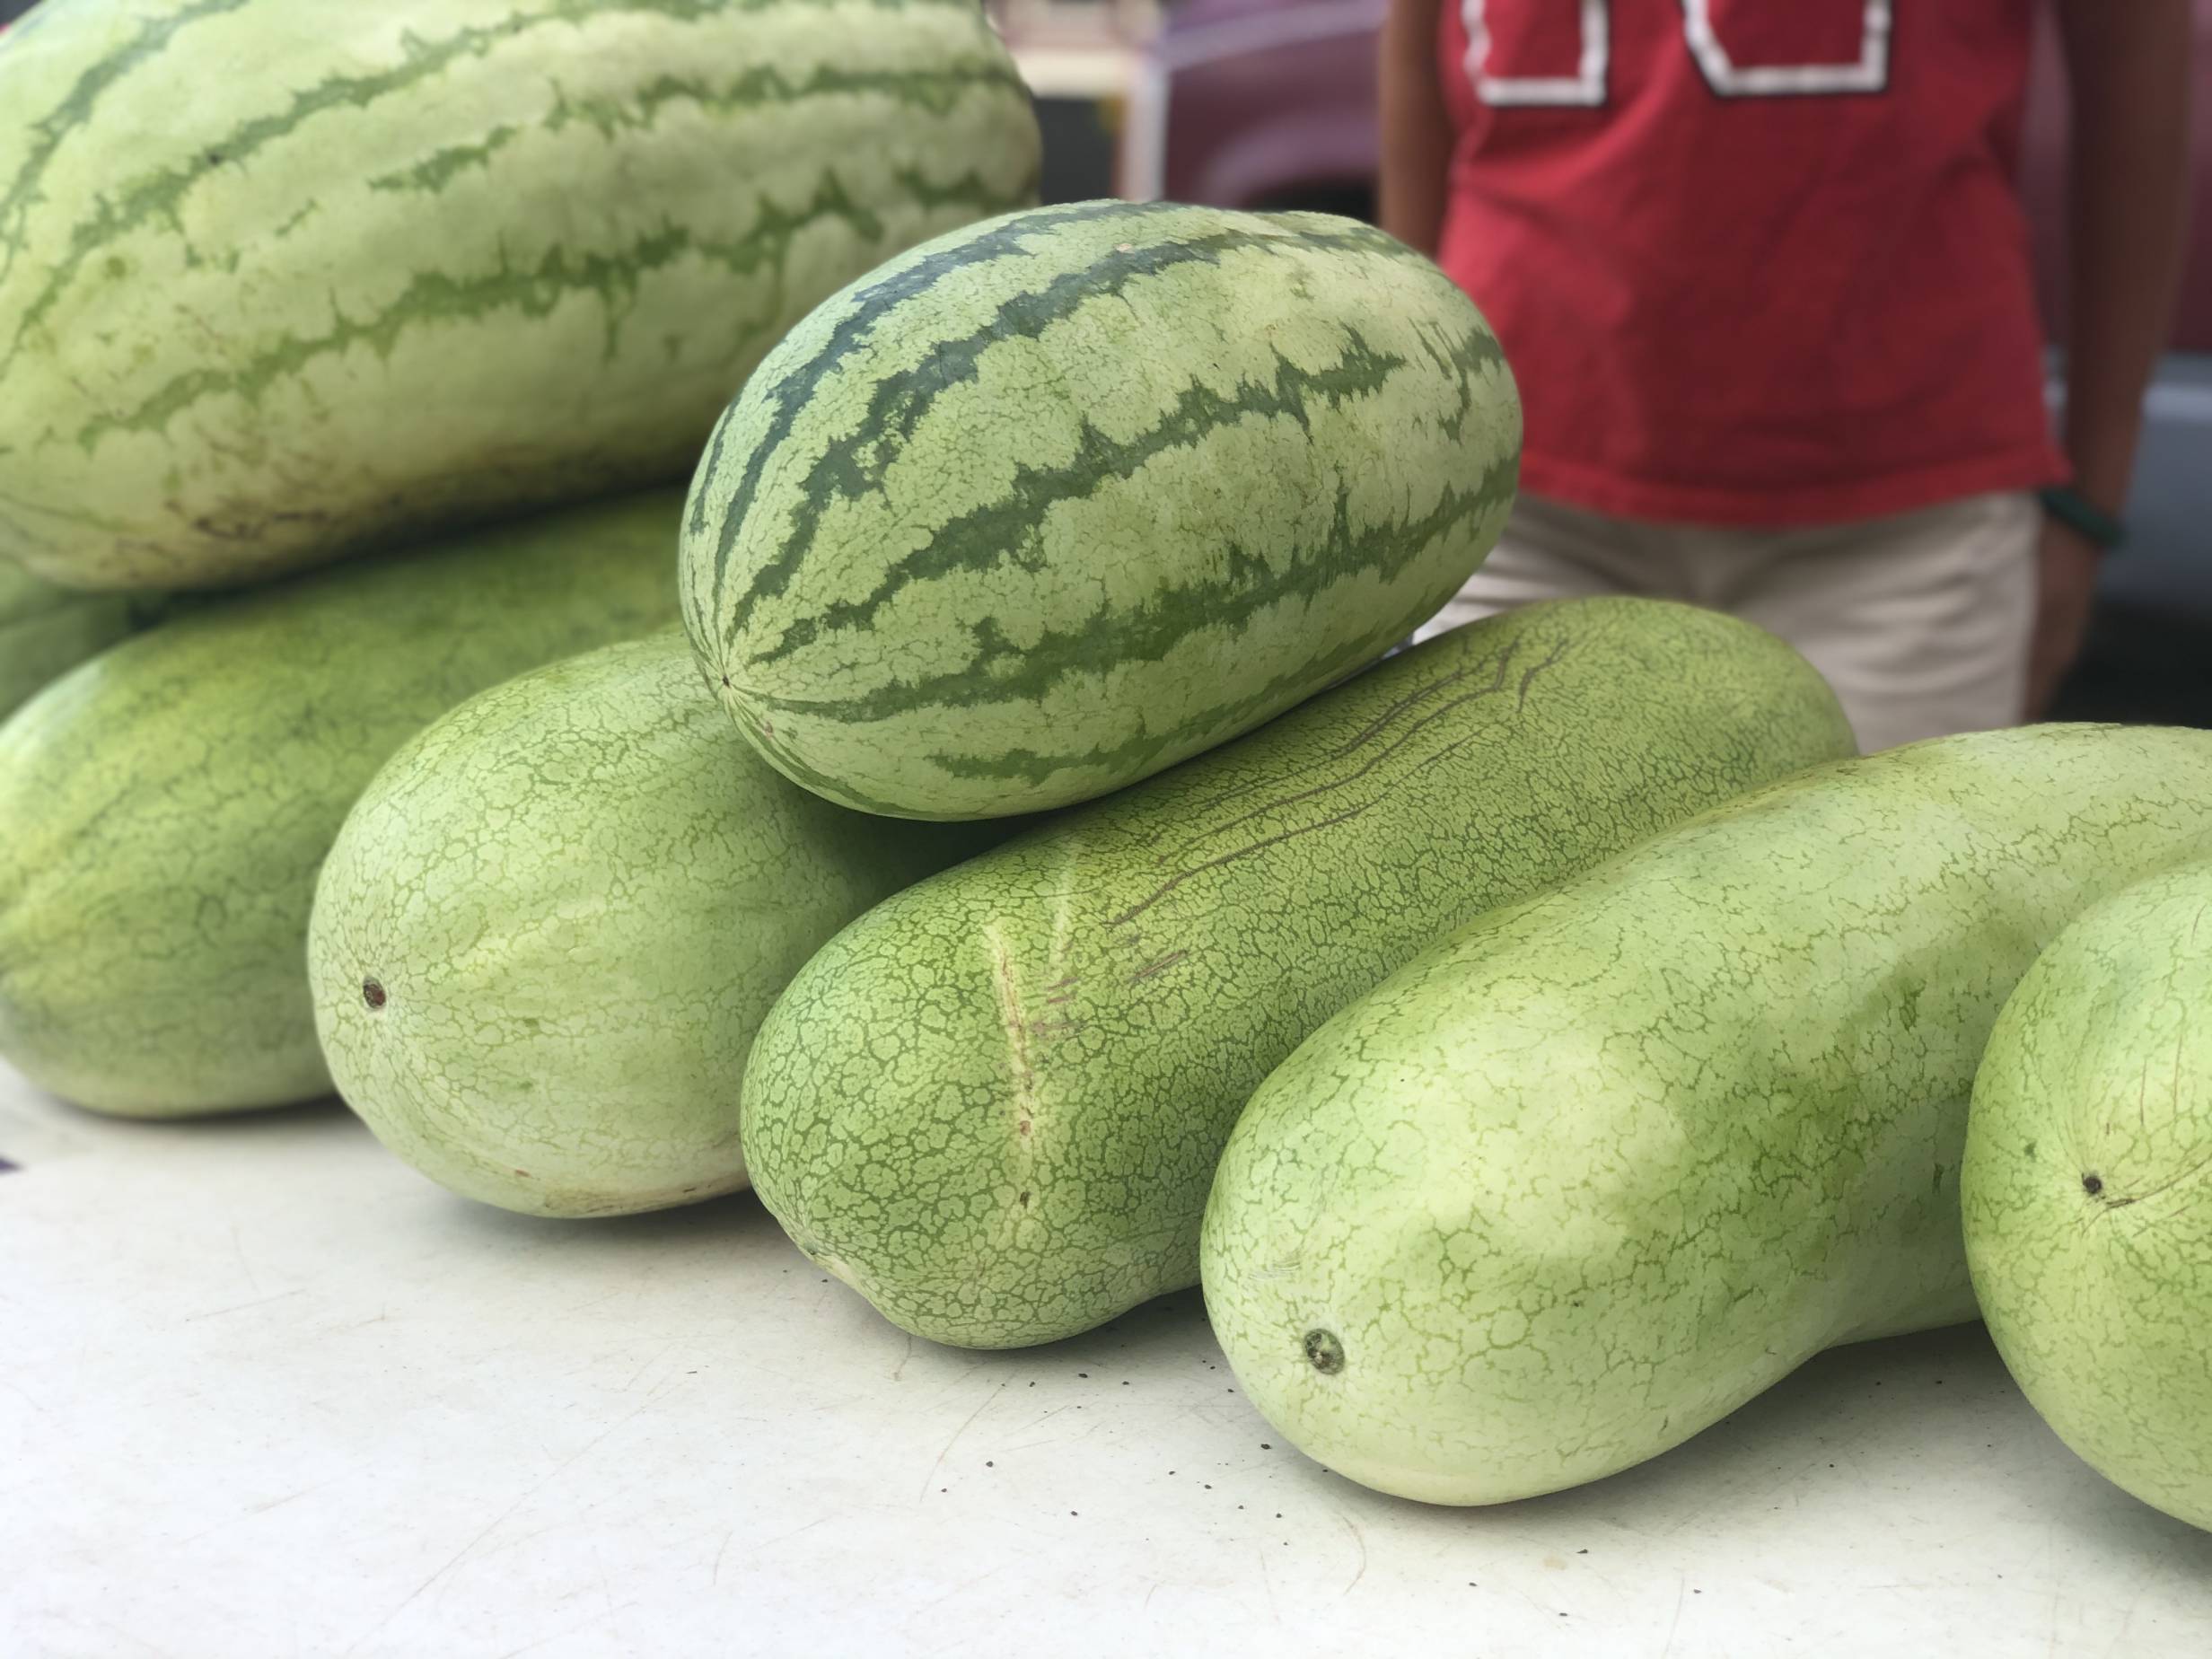 Long, light green watermelons are stacked neatly on a white table at the Champaign Farmers' Market. Photo by Alyssa Buckley.